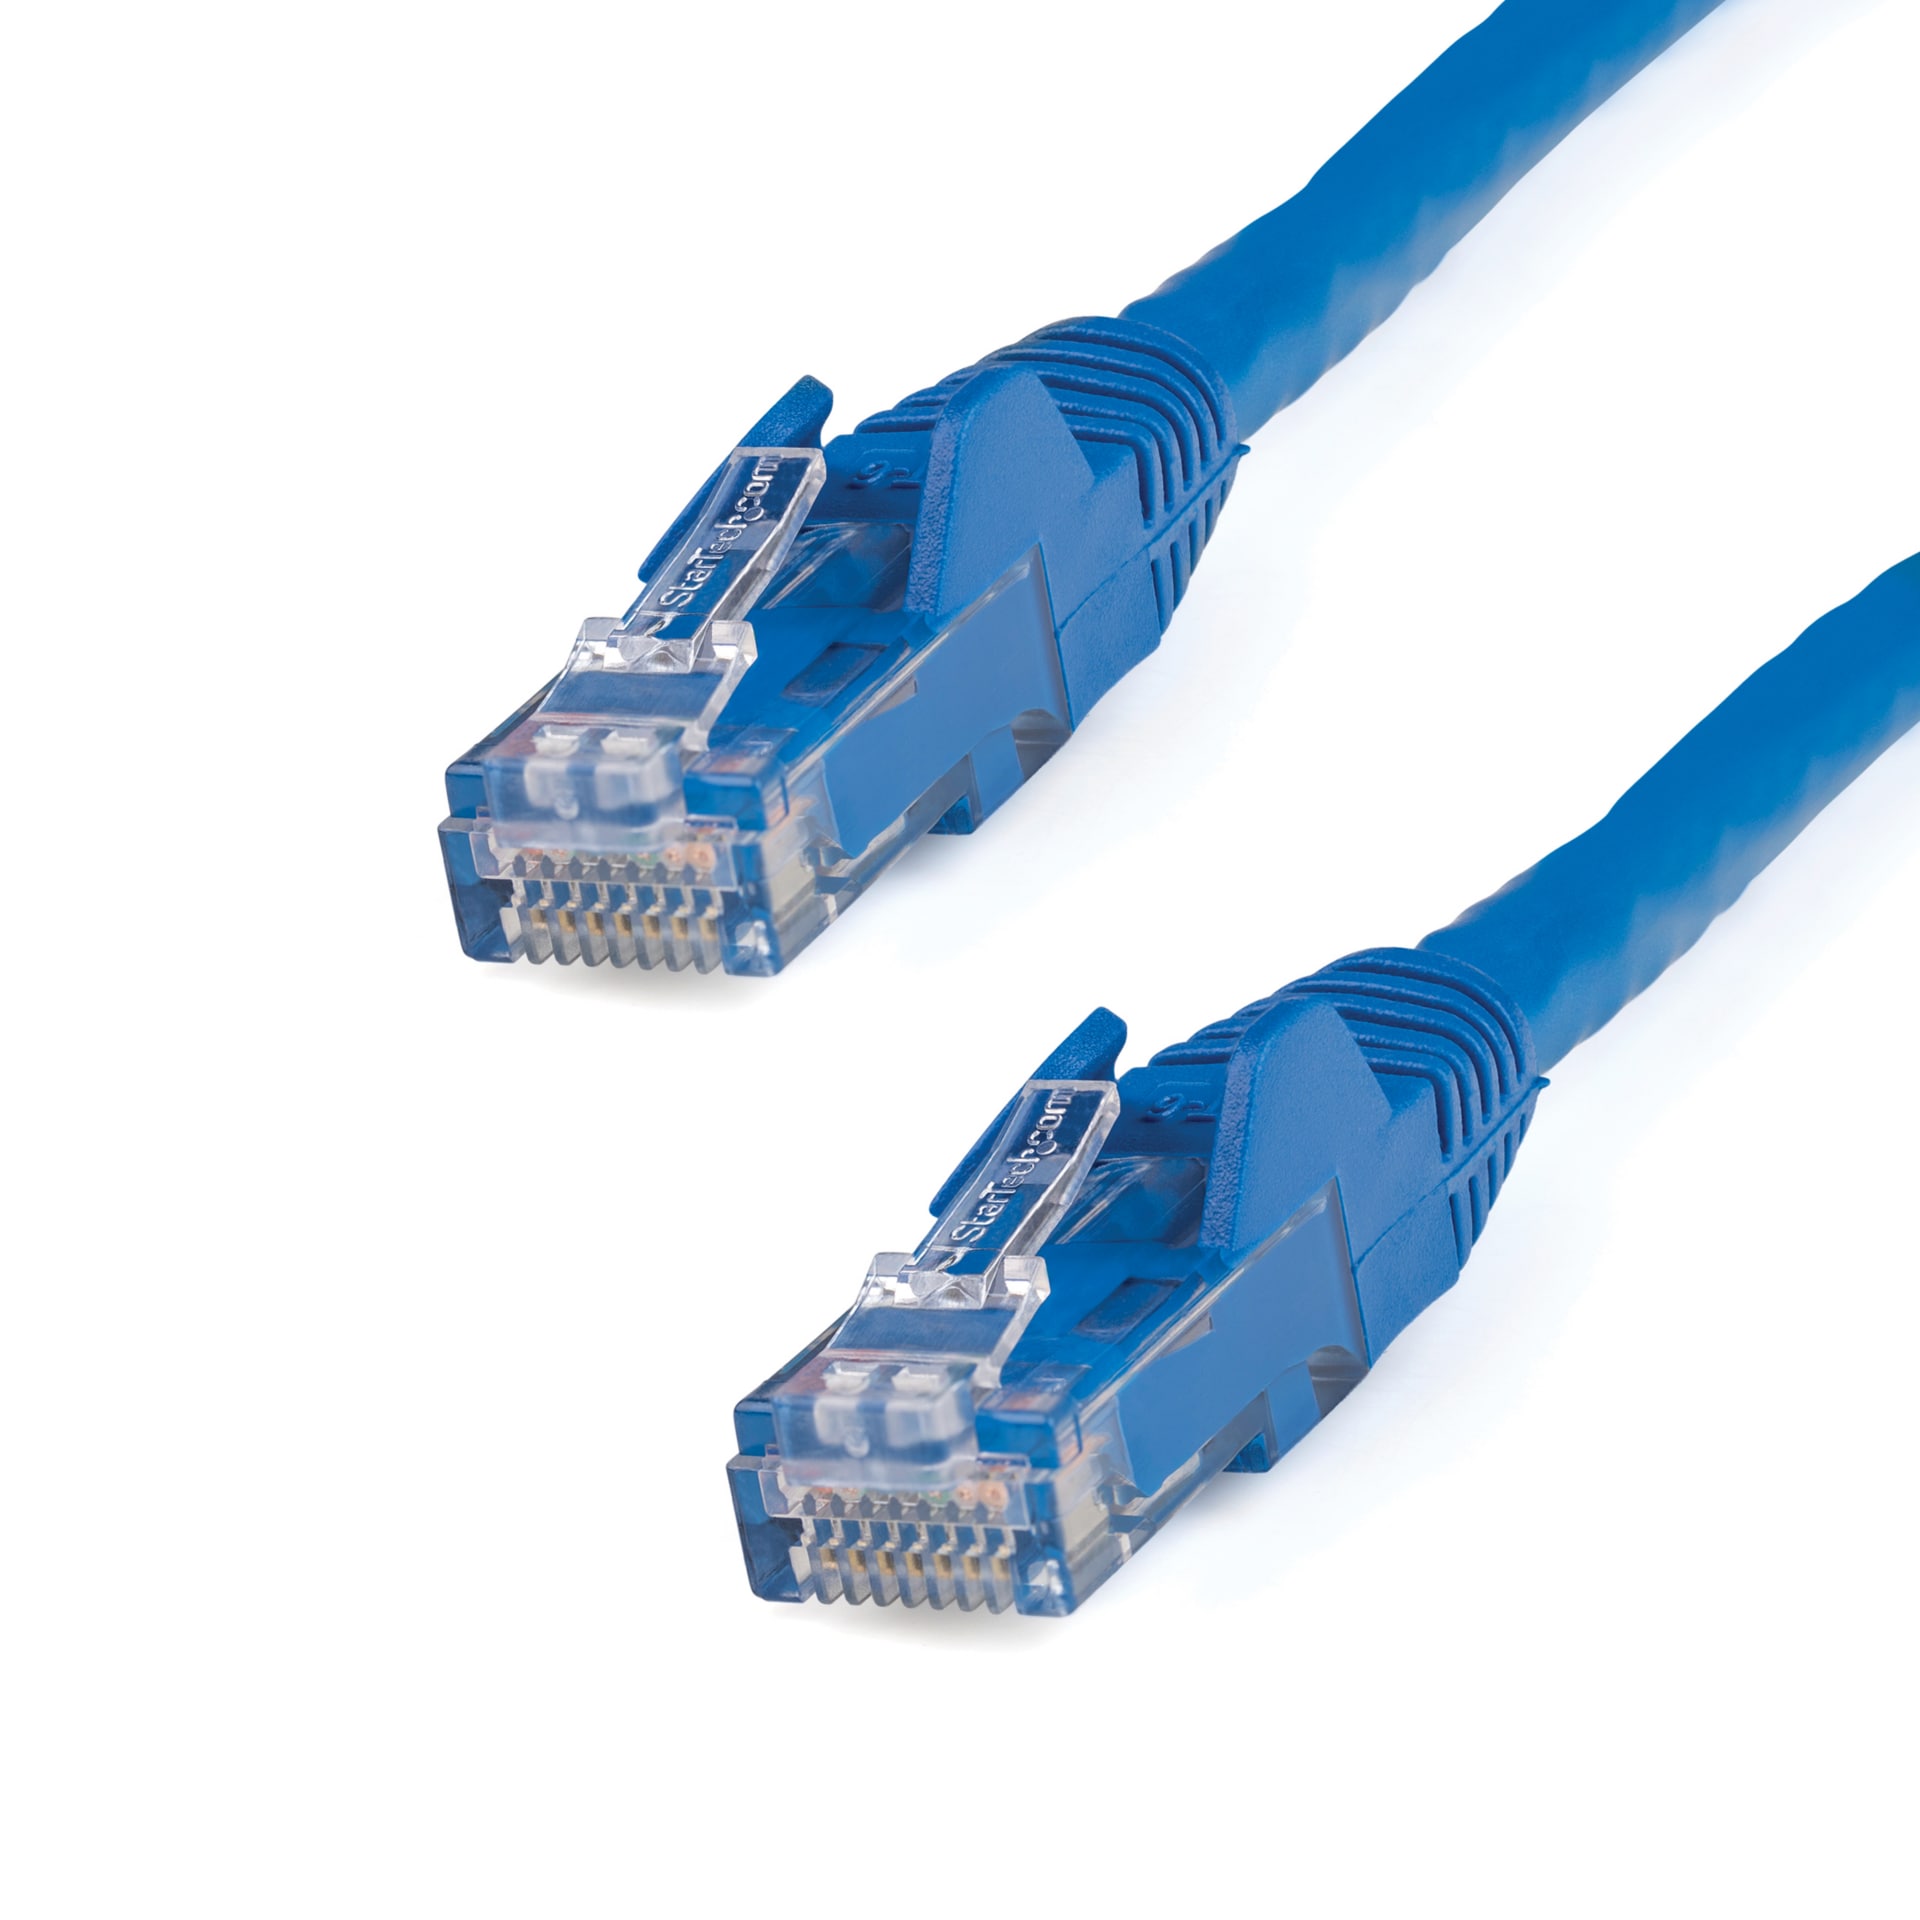 StarTech.com CAT6 Ethernet Cable 12' Black 650MHz PoE Snagless Patch Cord